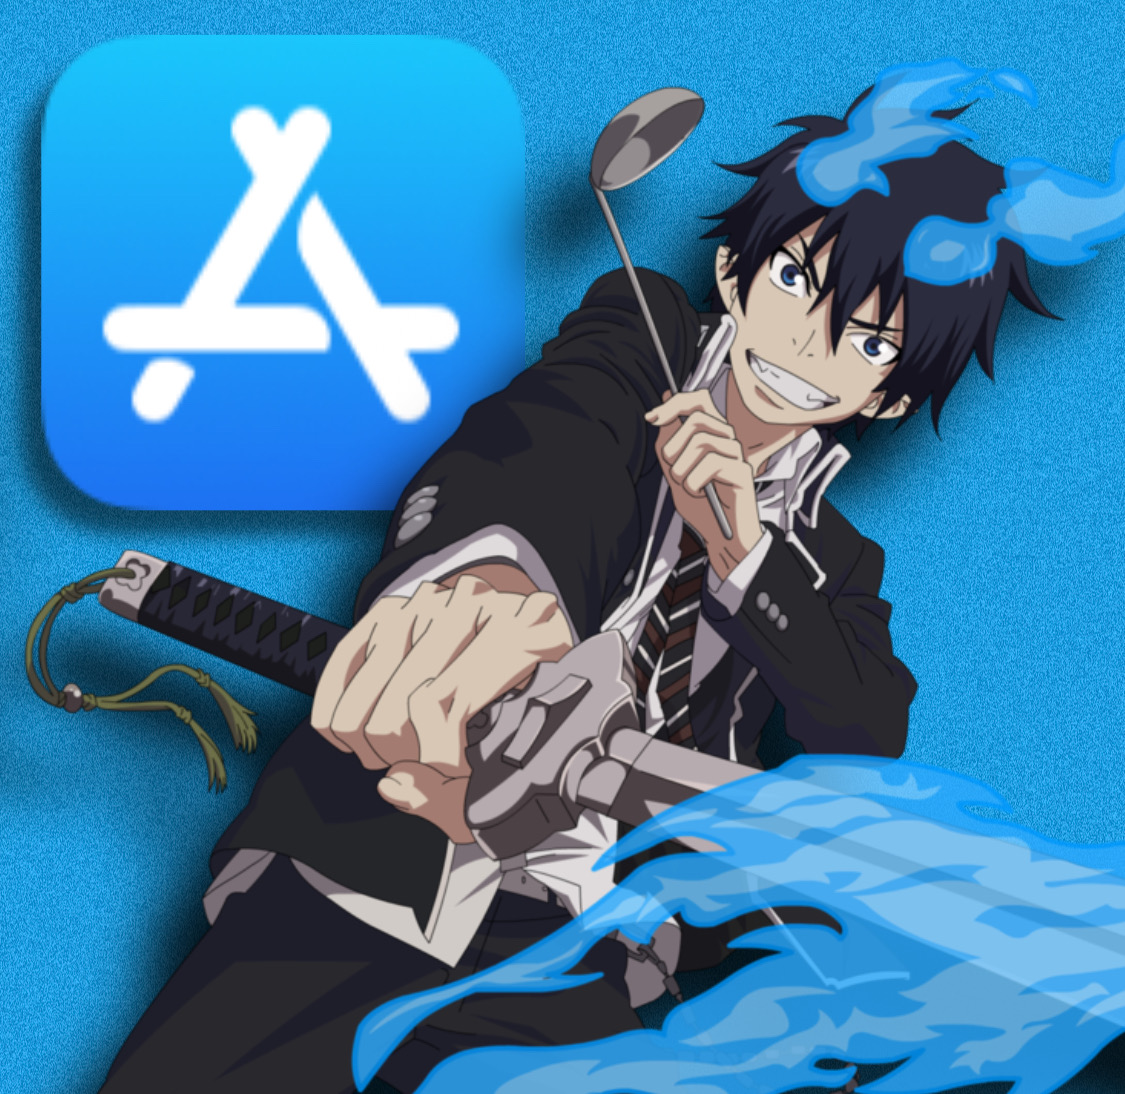 freetoedit anime app icon cover image by @sophiawilliams19